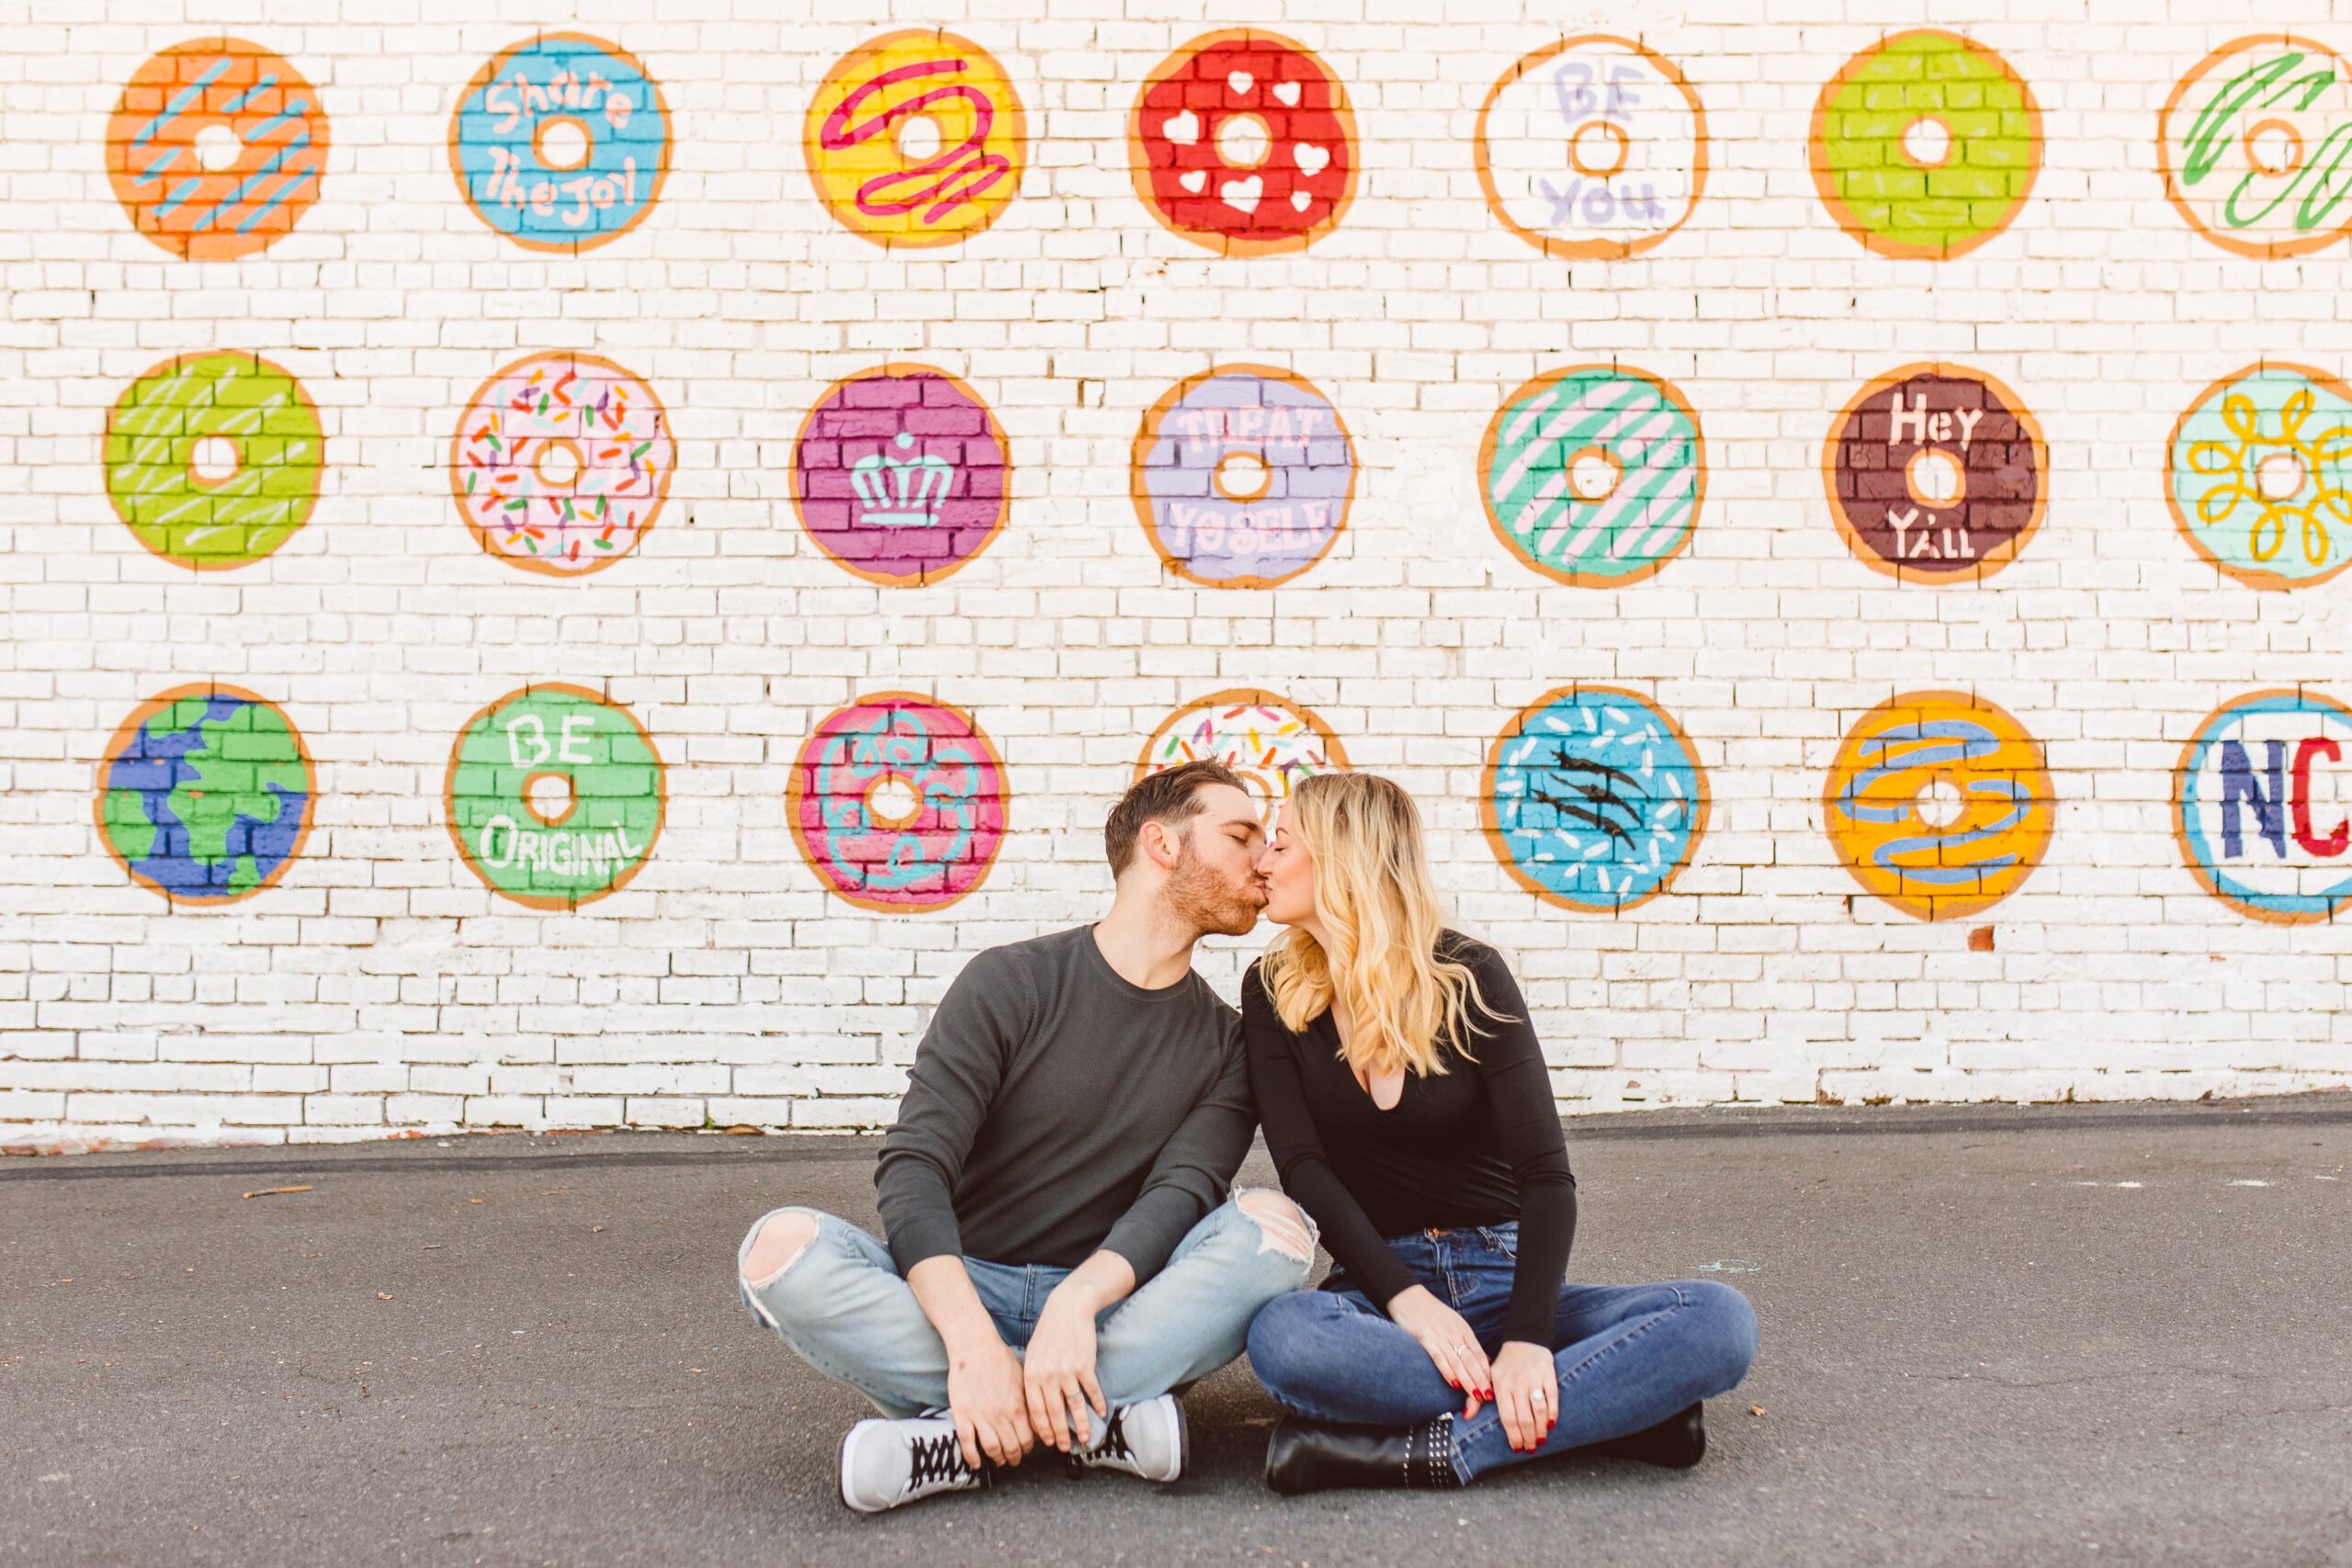 Dre Charlotte Influencer posing in front of Donut Wall 6. Donut Wall by Gina Elizabeth Franco at 2116 Hawkins St